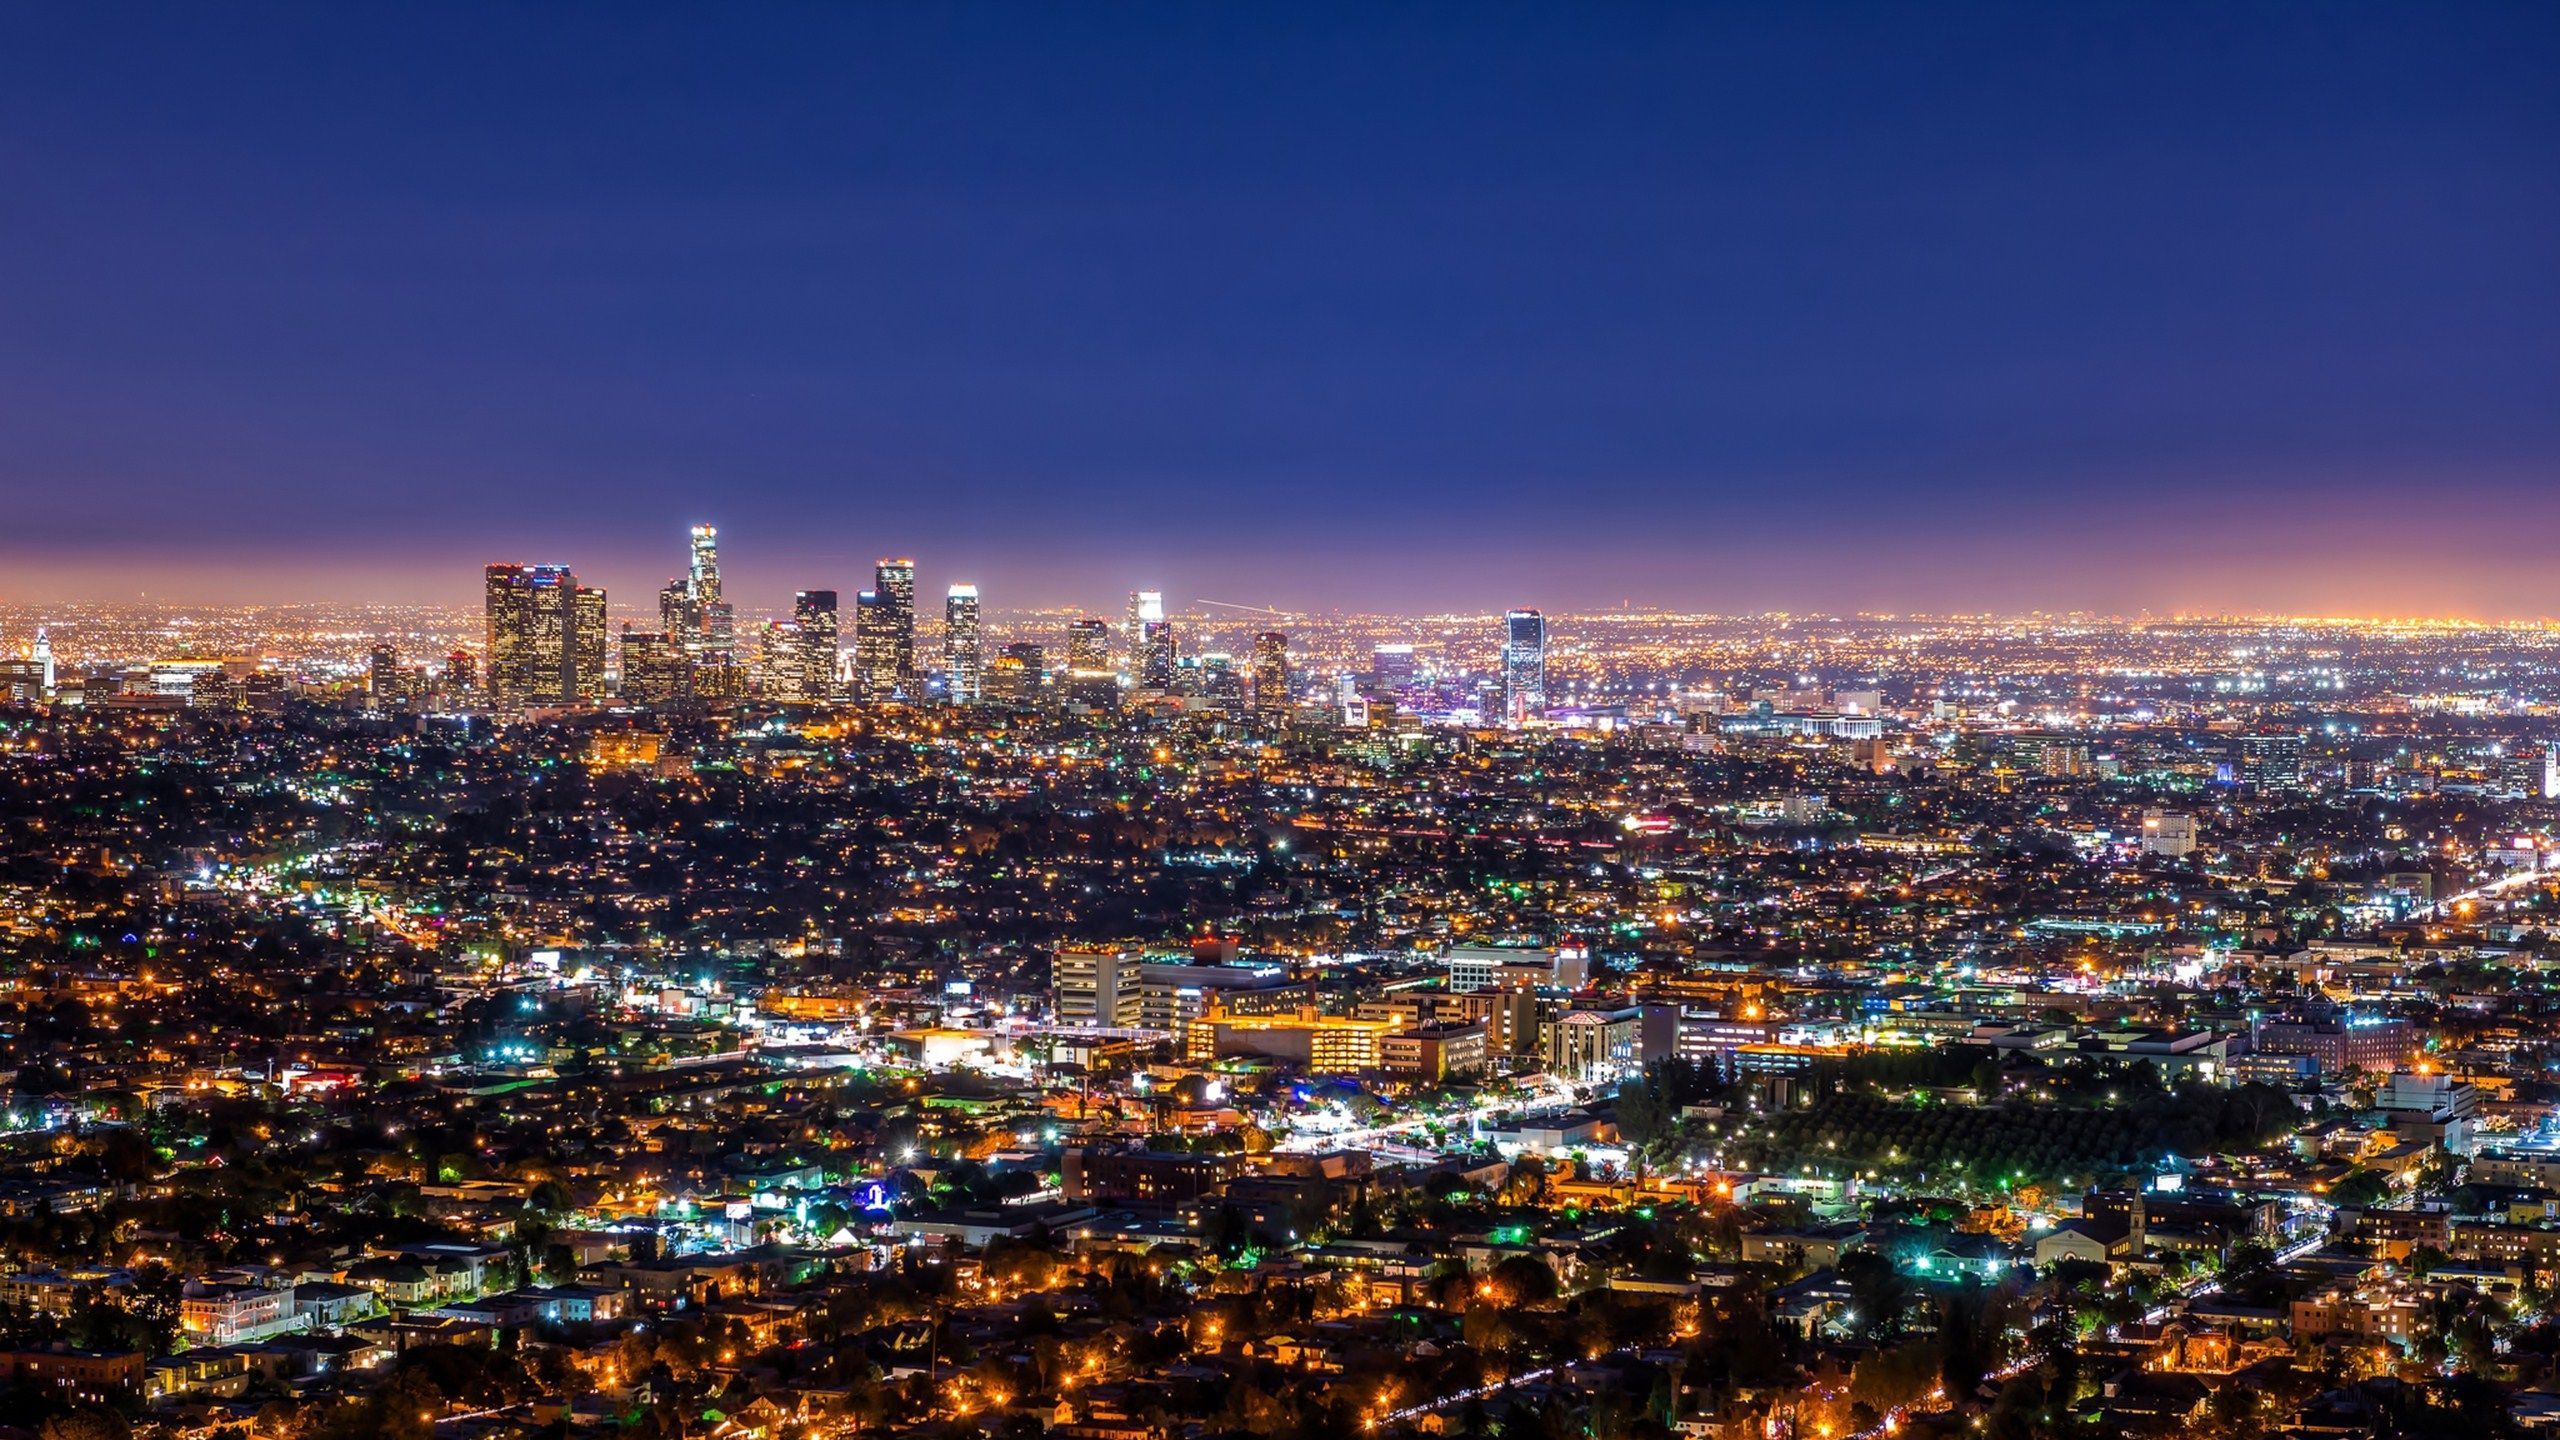 17 Los Angeles HD Wallpapers | Backgrounds - Wallpaper Abyss